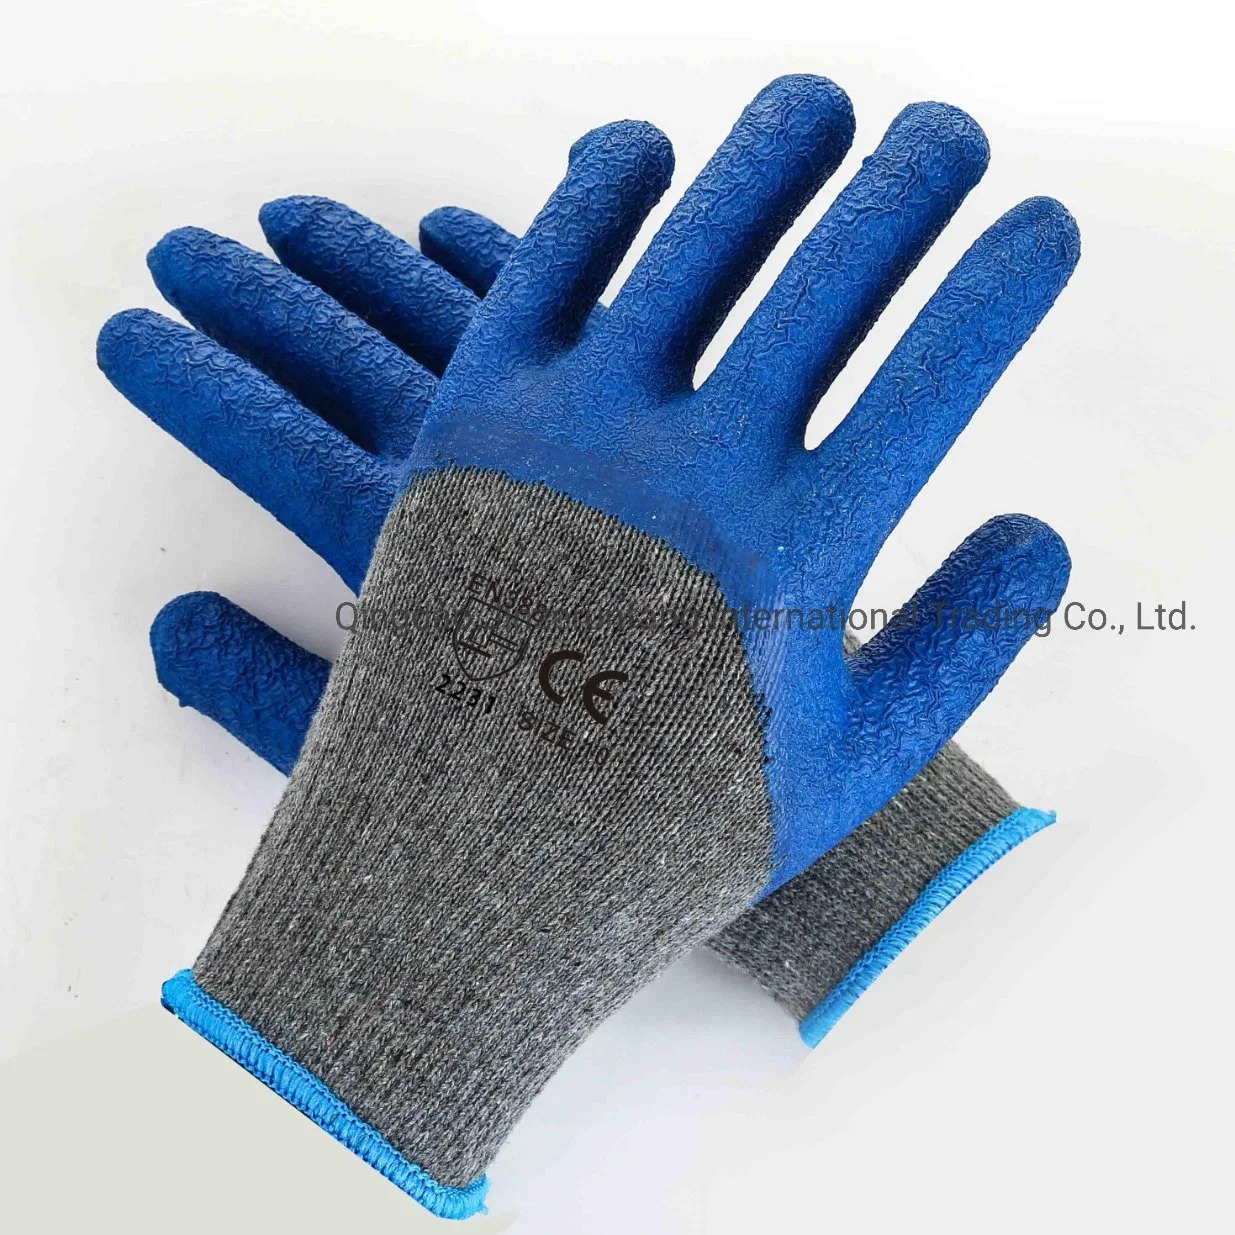 Industrial Seamless Mechanic Work Safety Labor Working Cut Resistant Protective Blue Latex Gray Polyester Hand Gloves